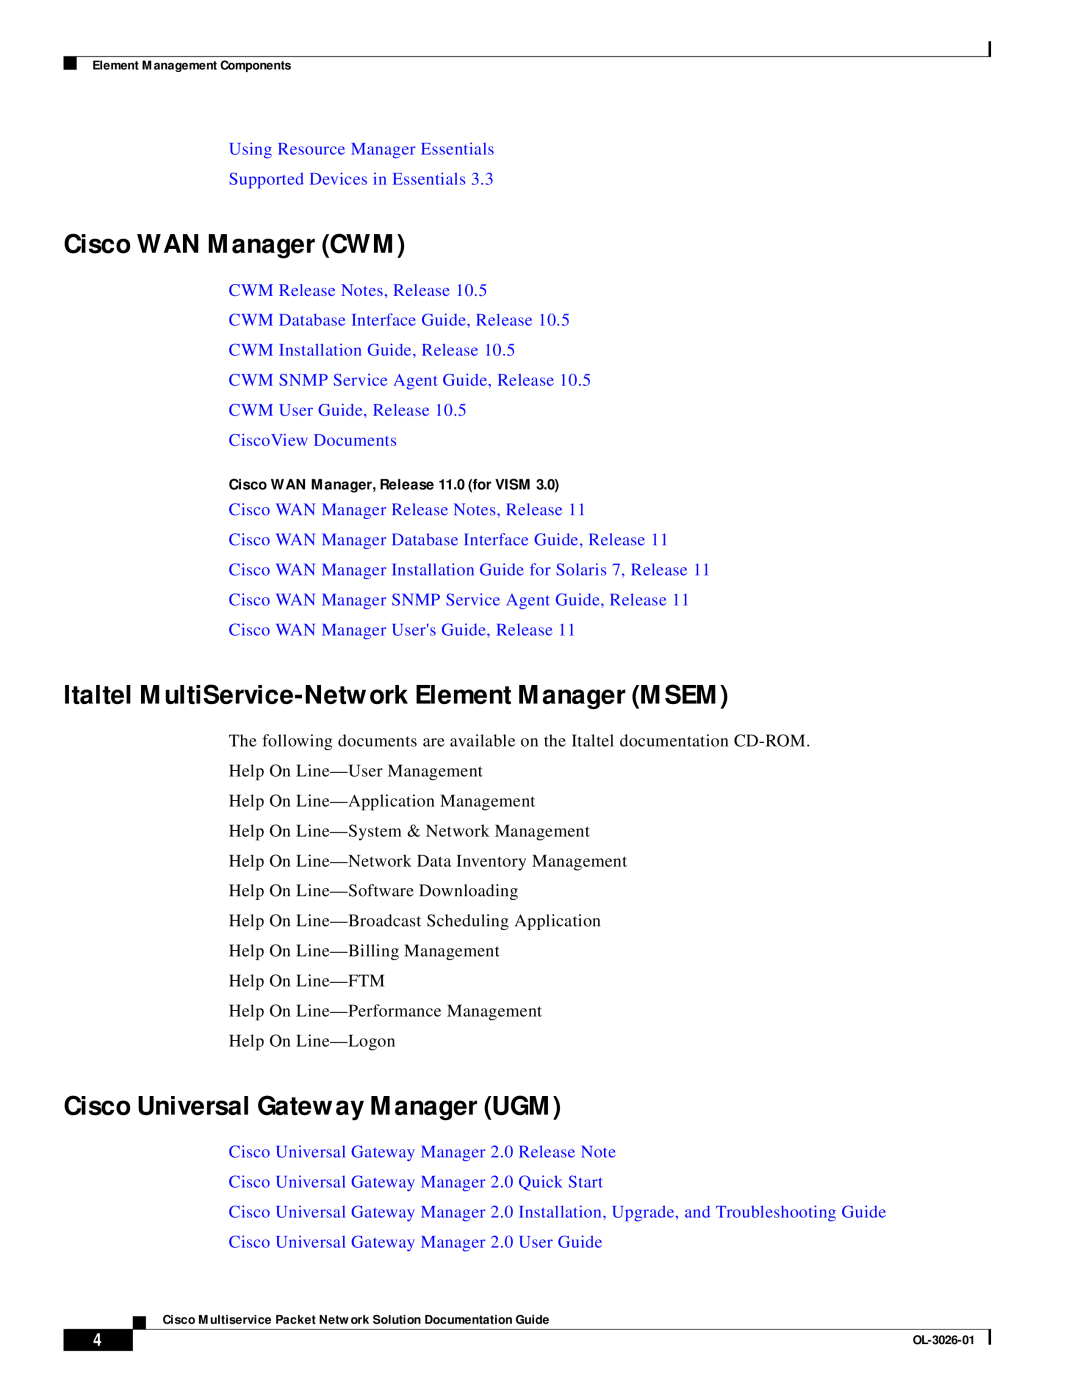 Cisco Systems OL-3026-01 manual Cisco WAN Manager CWM, Italtel MultiService-Network Element Manager MSEM 